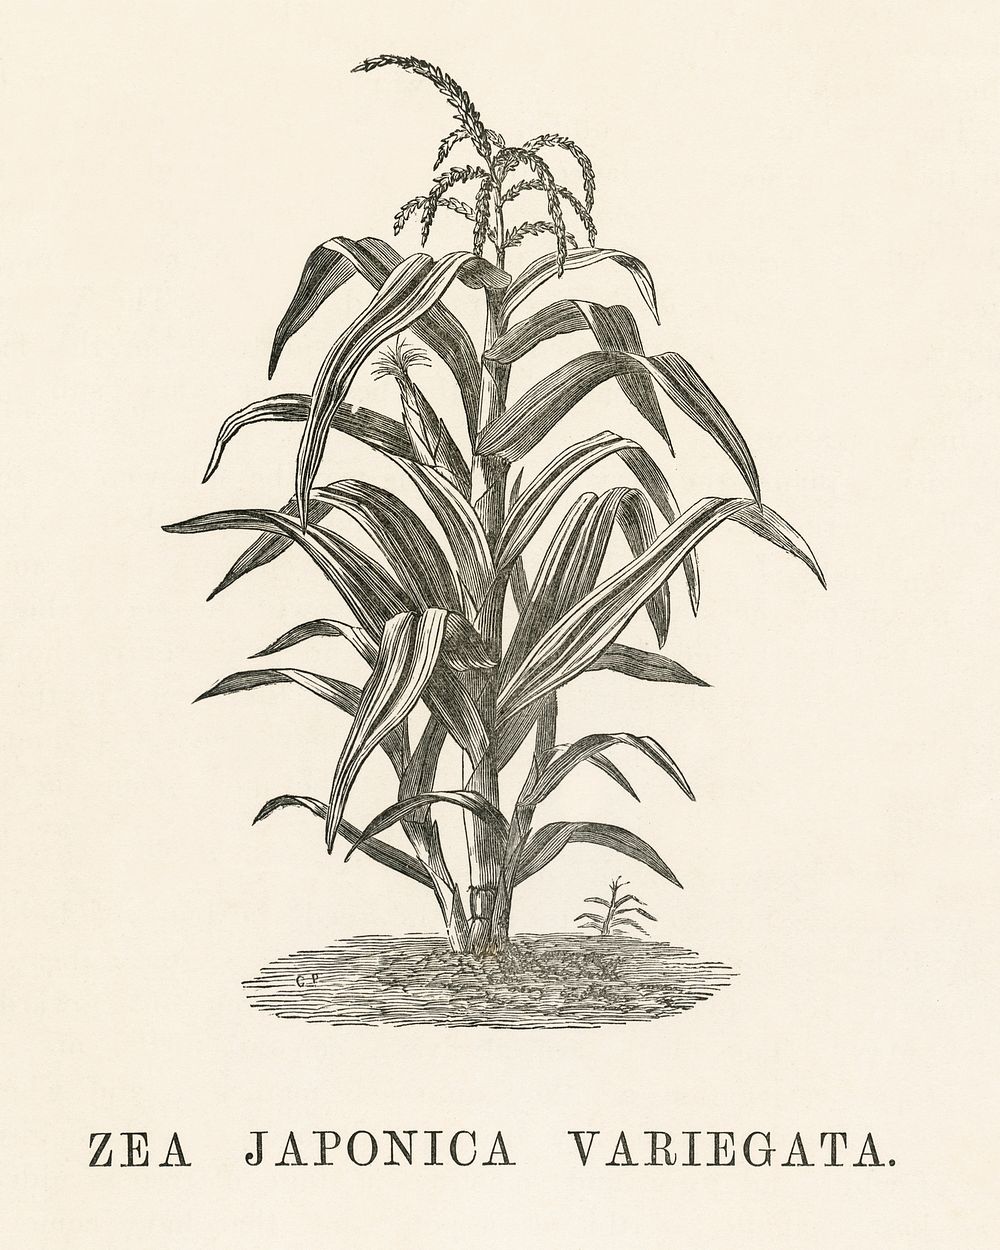 Zea Japonica Variegata engraved by Benjamin Fawcett (1808-1893) for Shirley Hibberd&rsquo;s (1825-1890) New and Rare…